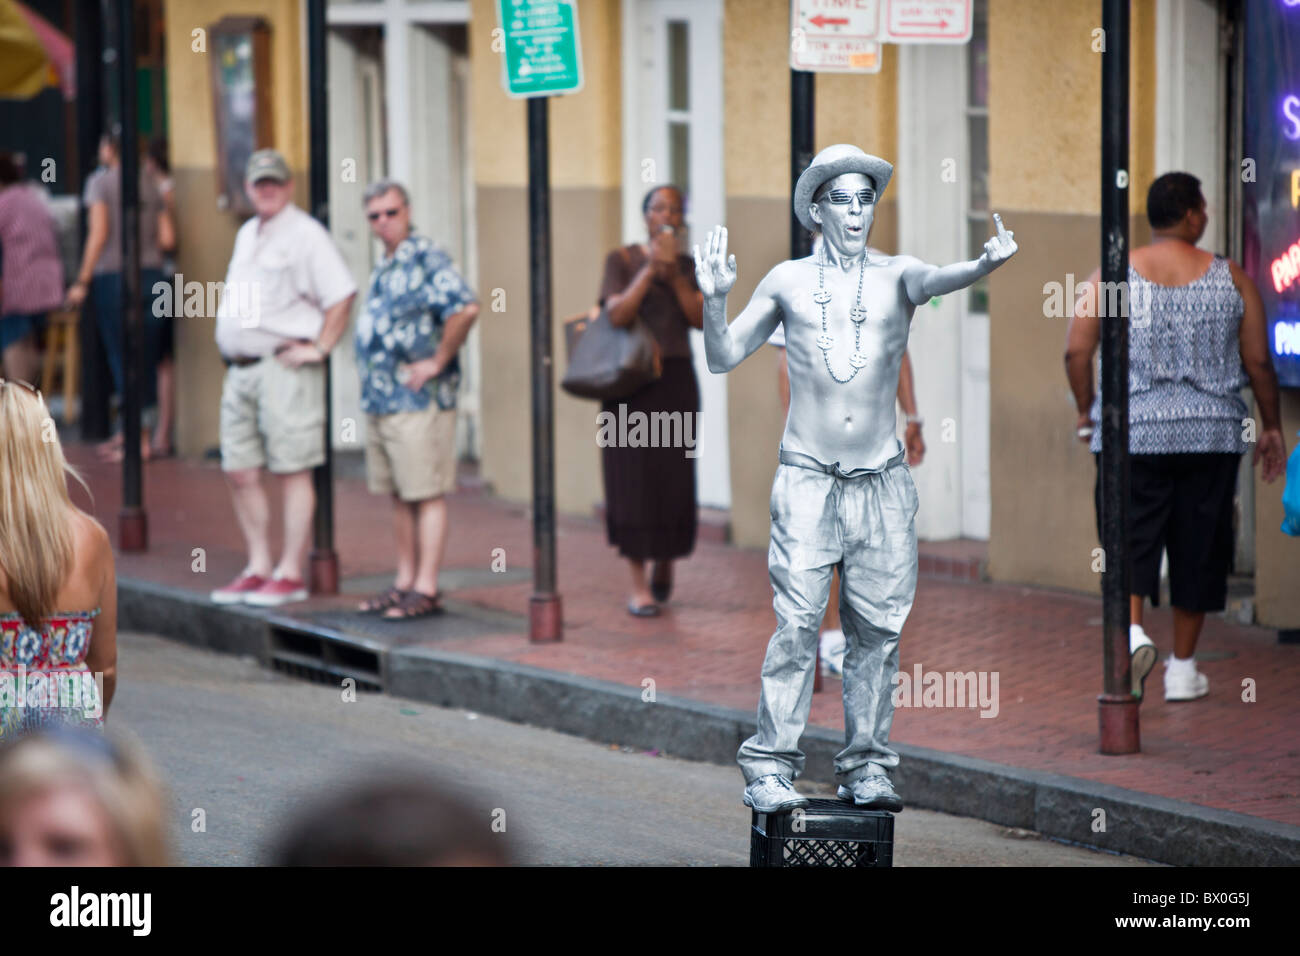 Mimes/performers painted in silver and gold pose for tips on Bourbon Street in New Orleans, Louisiana's French Quarter. Stock Photo